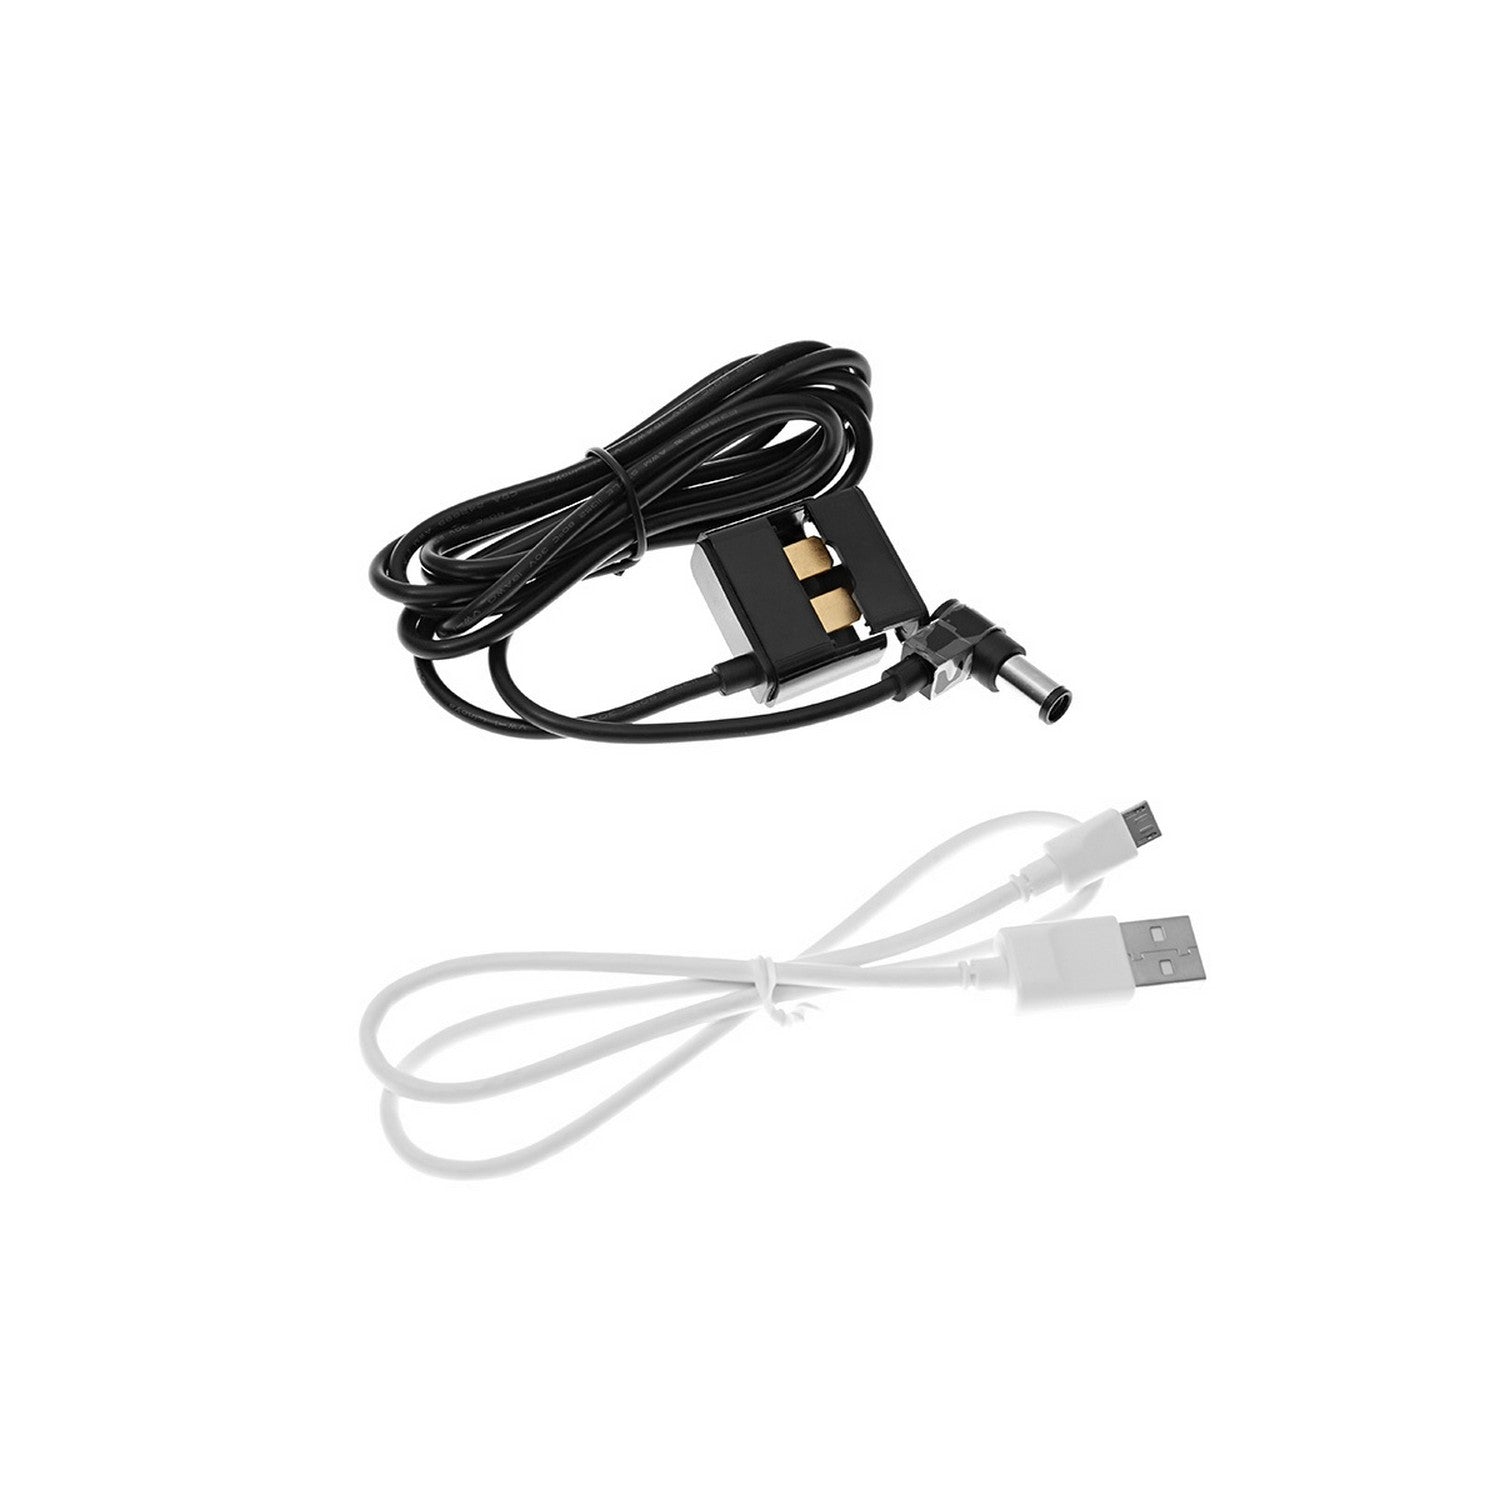 I1 Part 34 RC Cable Kit (Inspire 1)-0